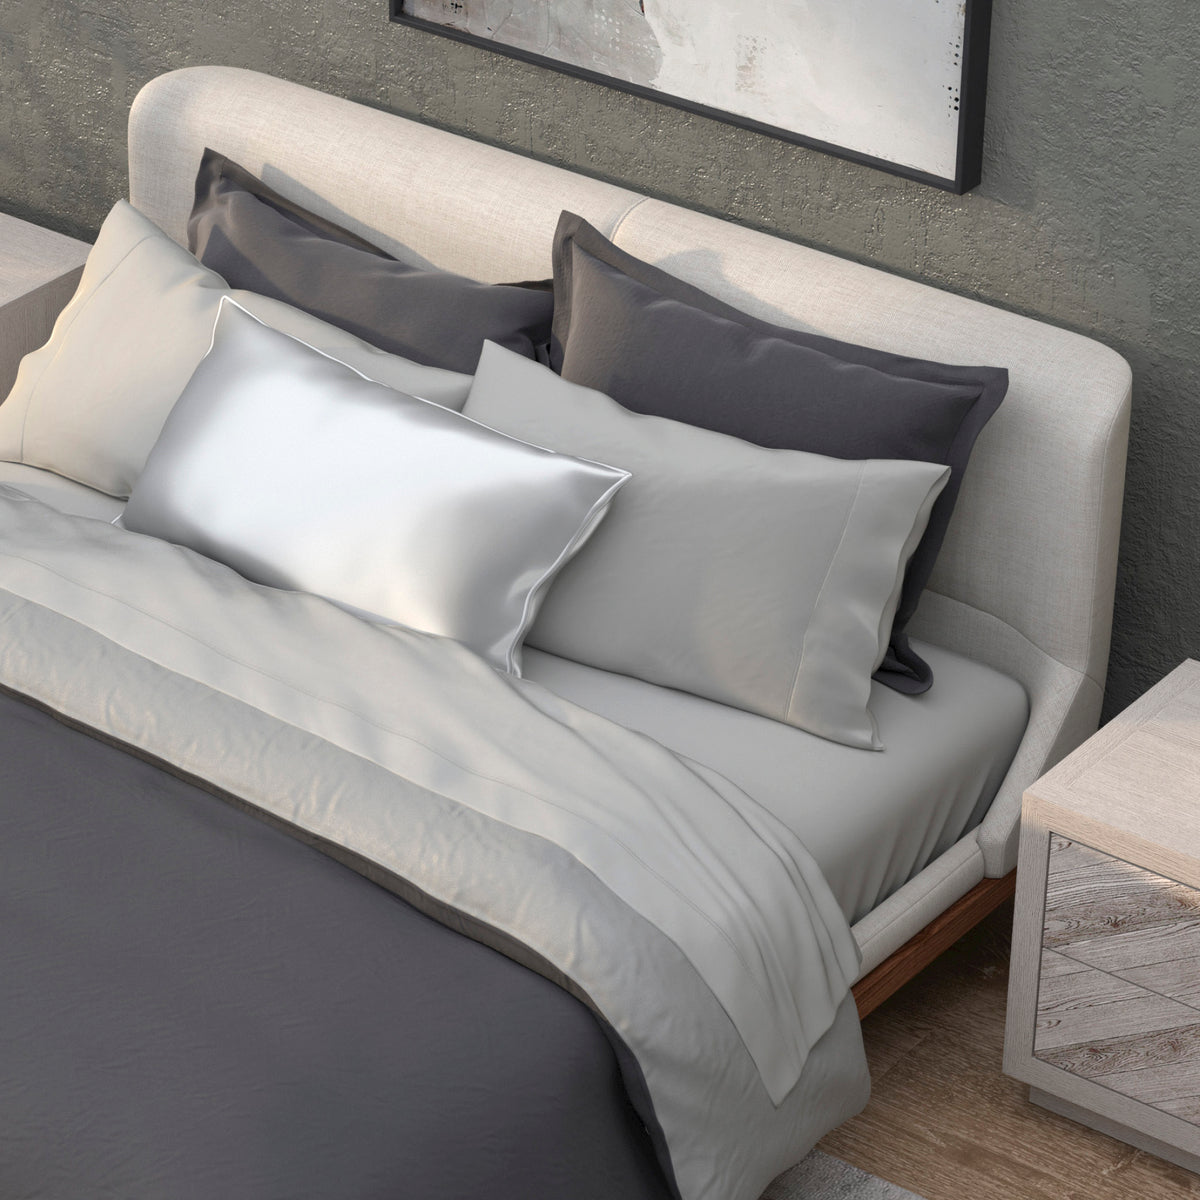 Image of a neatly made bed with a dark gray duvet and the Dove Gray Recovery Viscose Sheet Set and Pillowcases